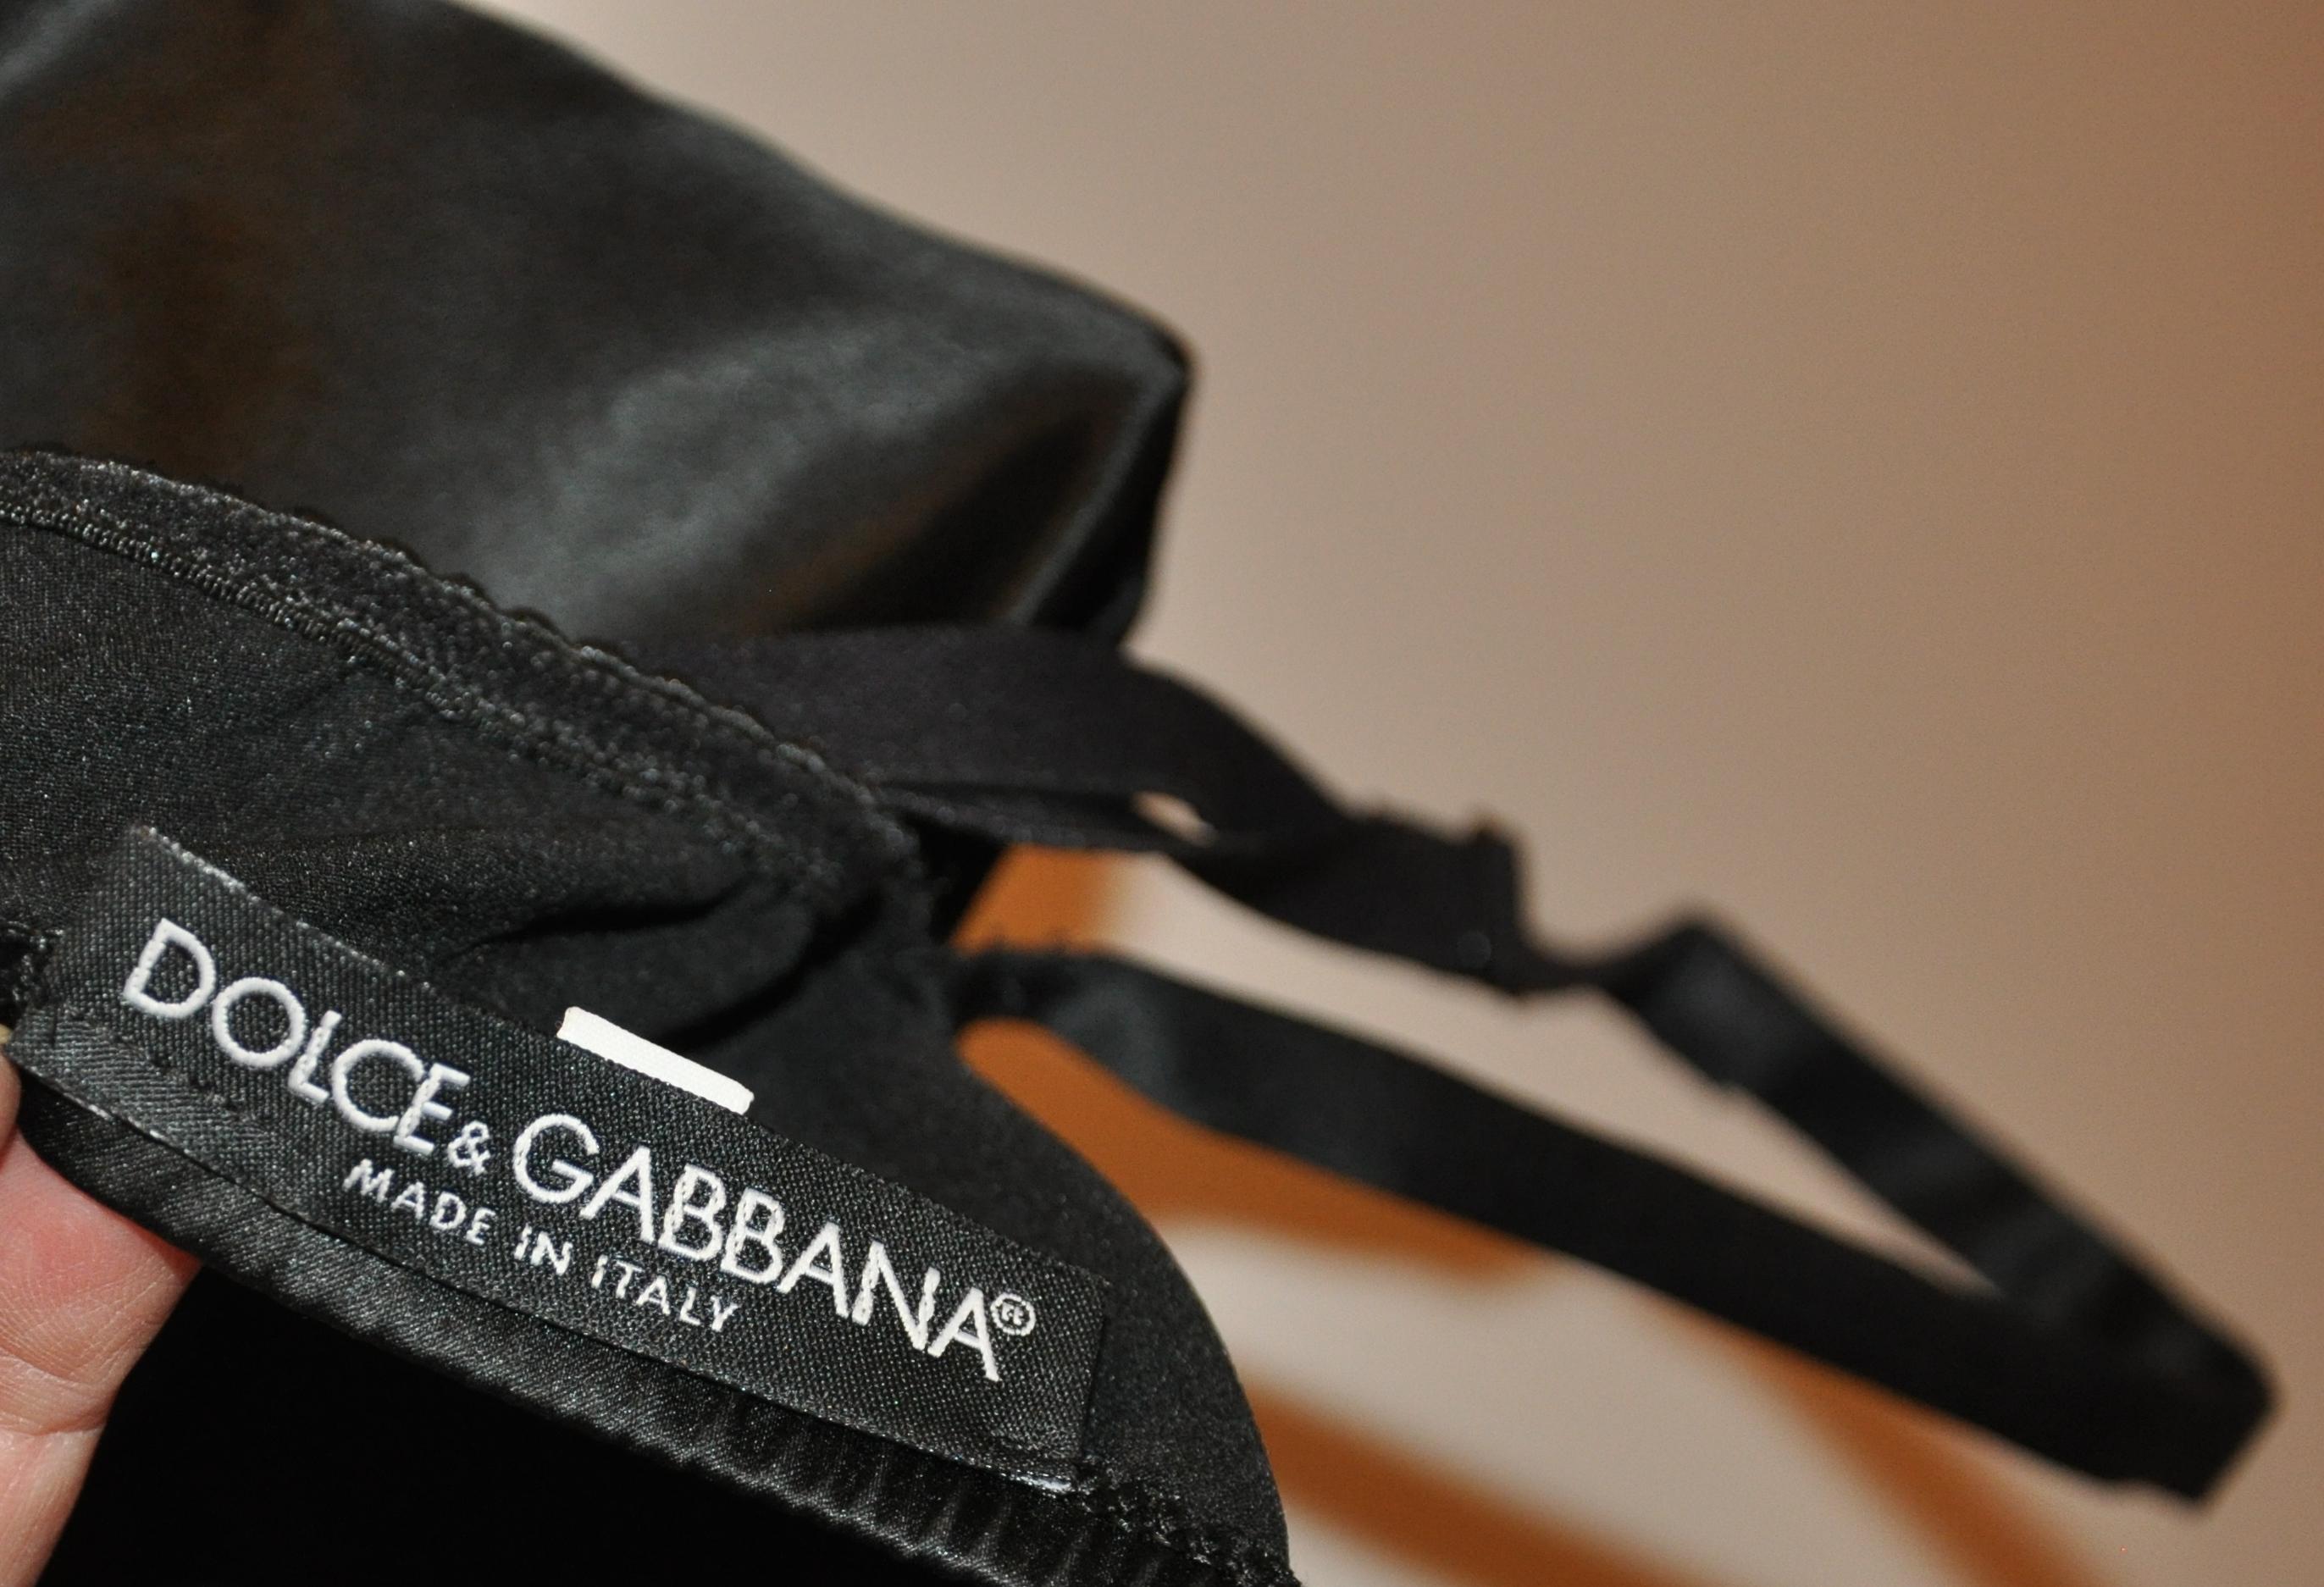 Dolce & Gabbana Midnight-Black Body-Hugging Spandex Built-In Bra Evening Dress In Good Condition For Sale In New York, NY